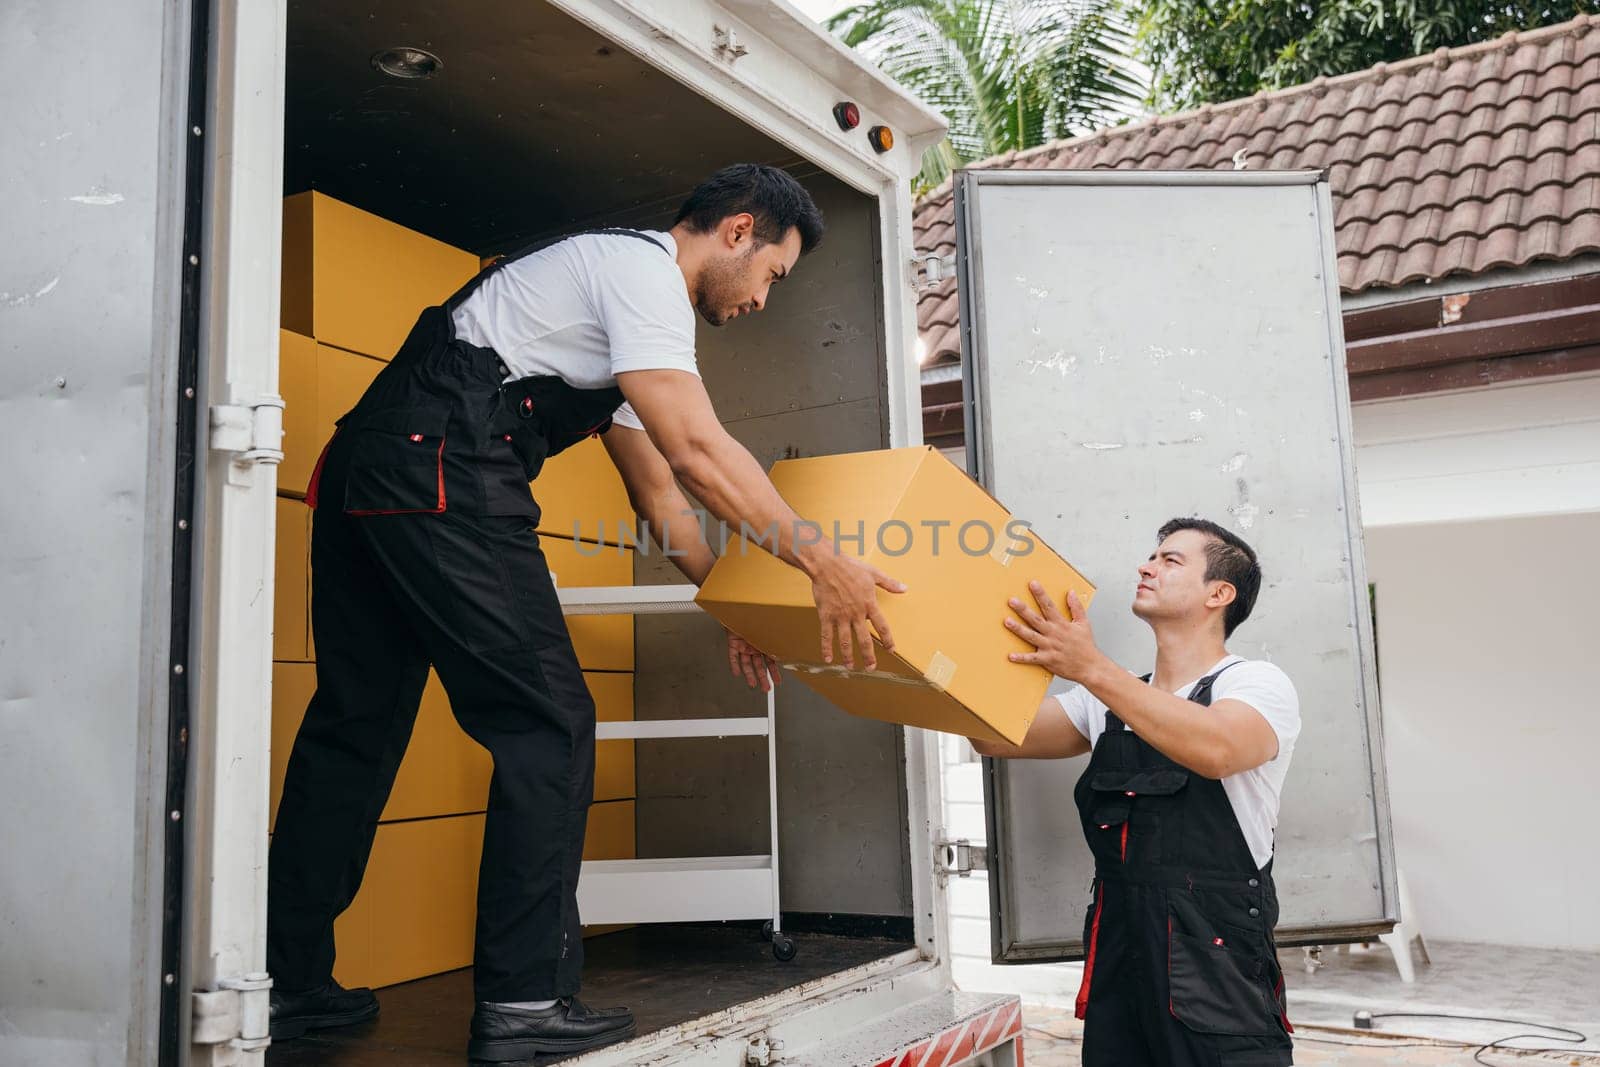 Teamwork in action, workers unload boxes from the moving truck for customer relocation. The company dedication ensures a smooth move and happiness. Moving Day